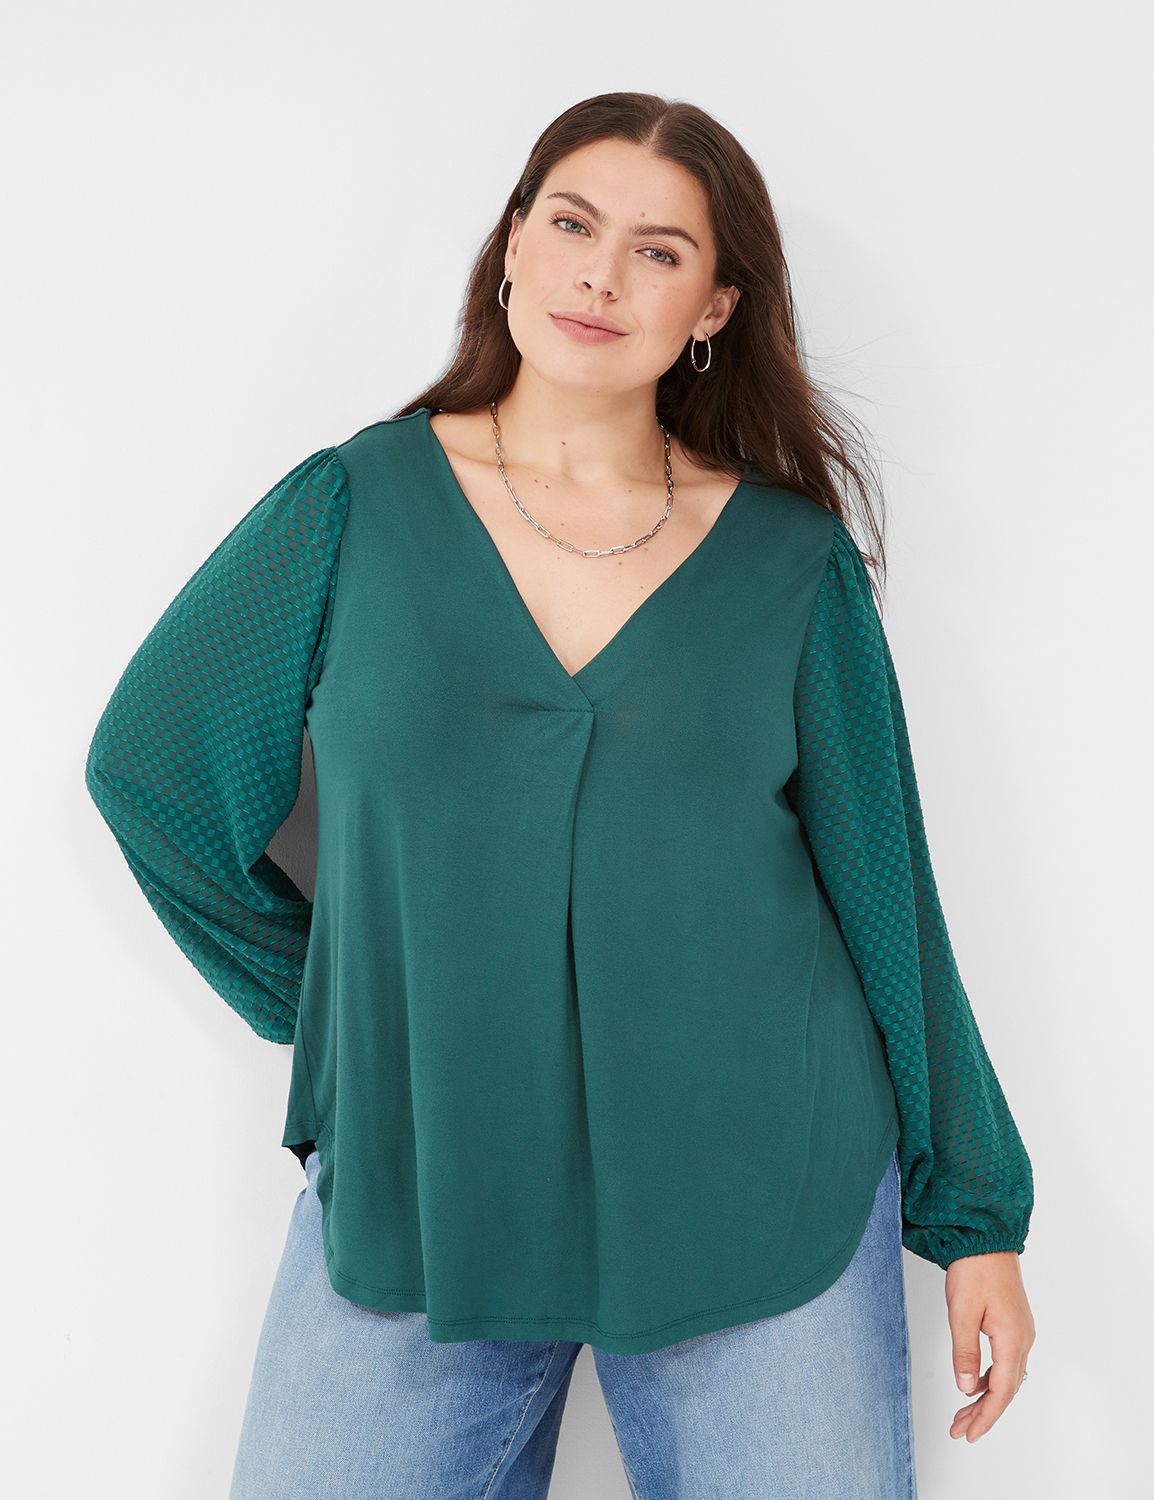 Long Sleeve V neck top with woven s | LaneBryant